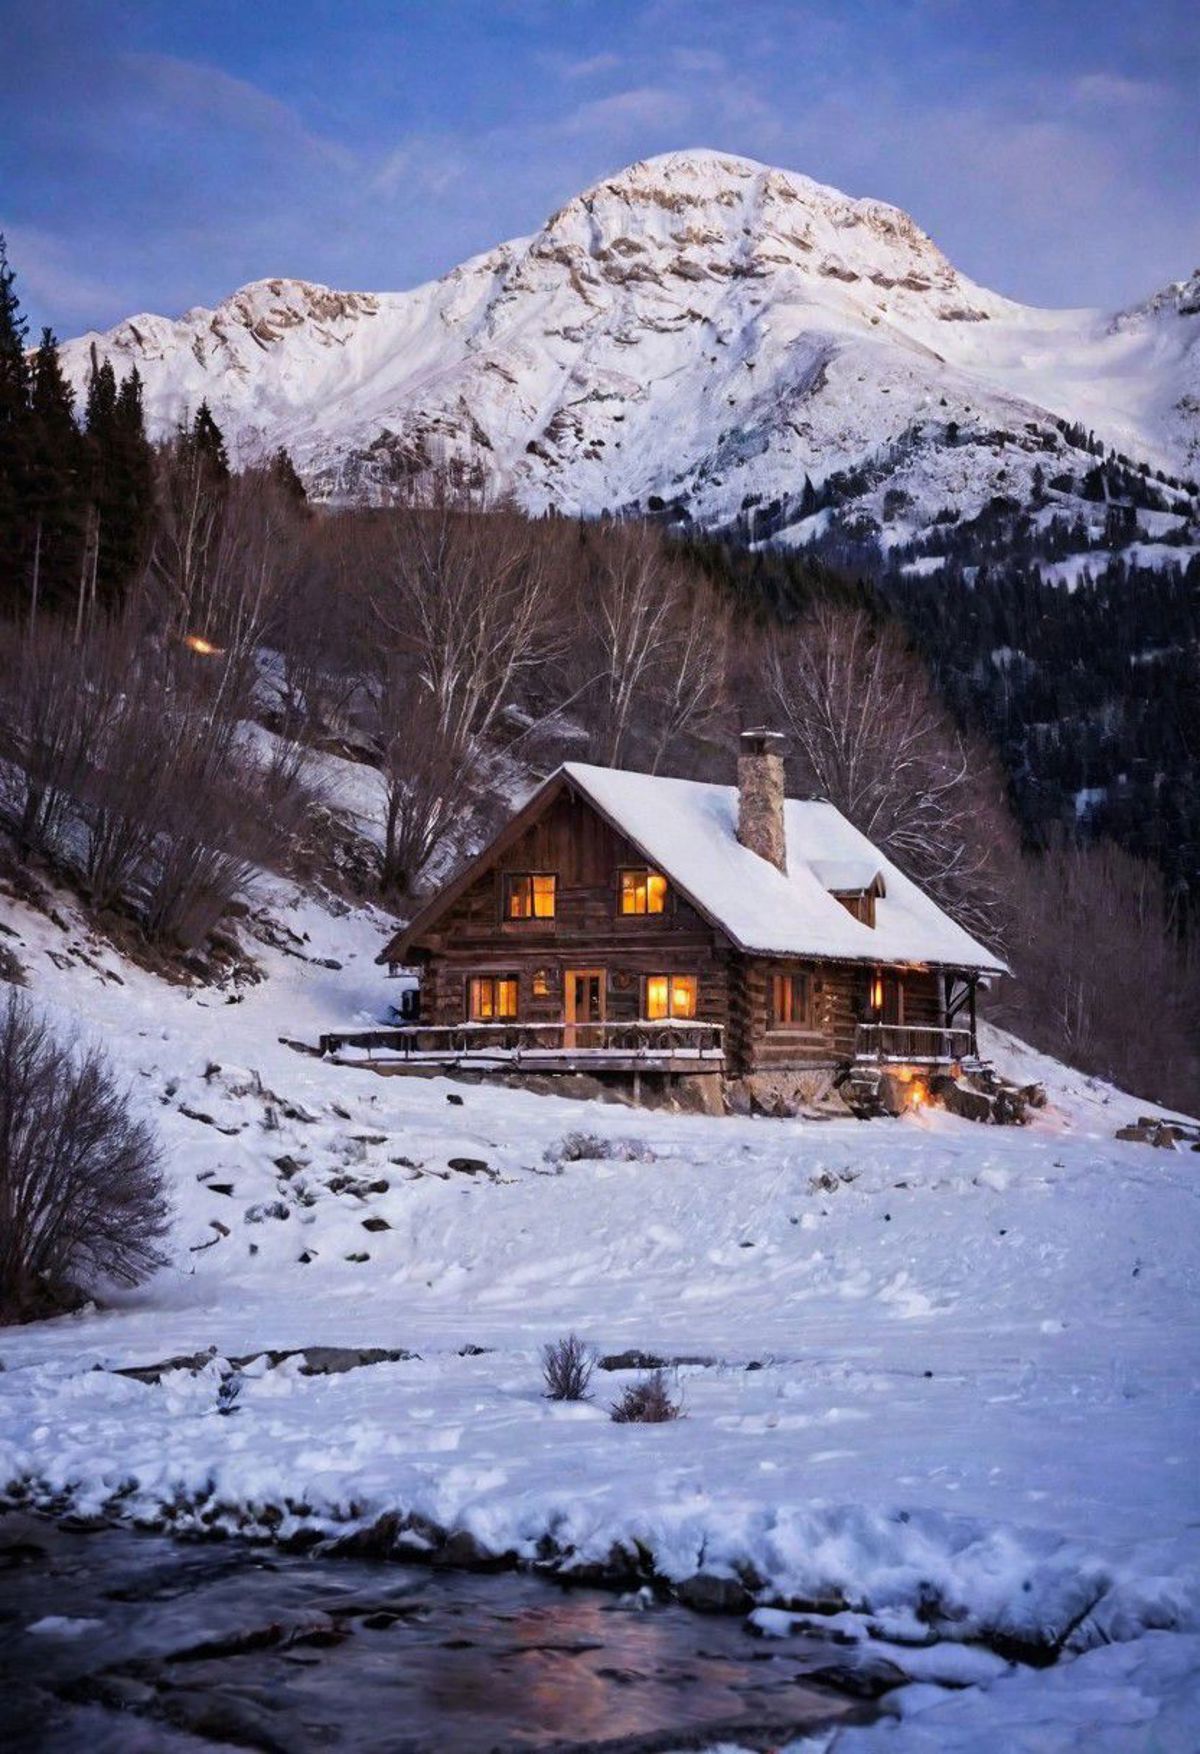 A log cabin with a stone chimney in a snowy mountain setting.